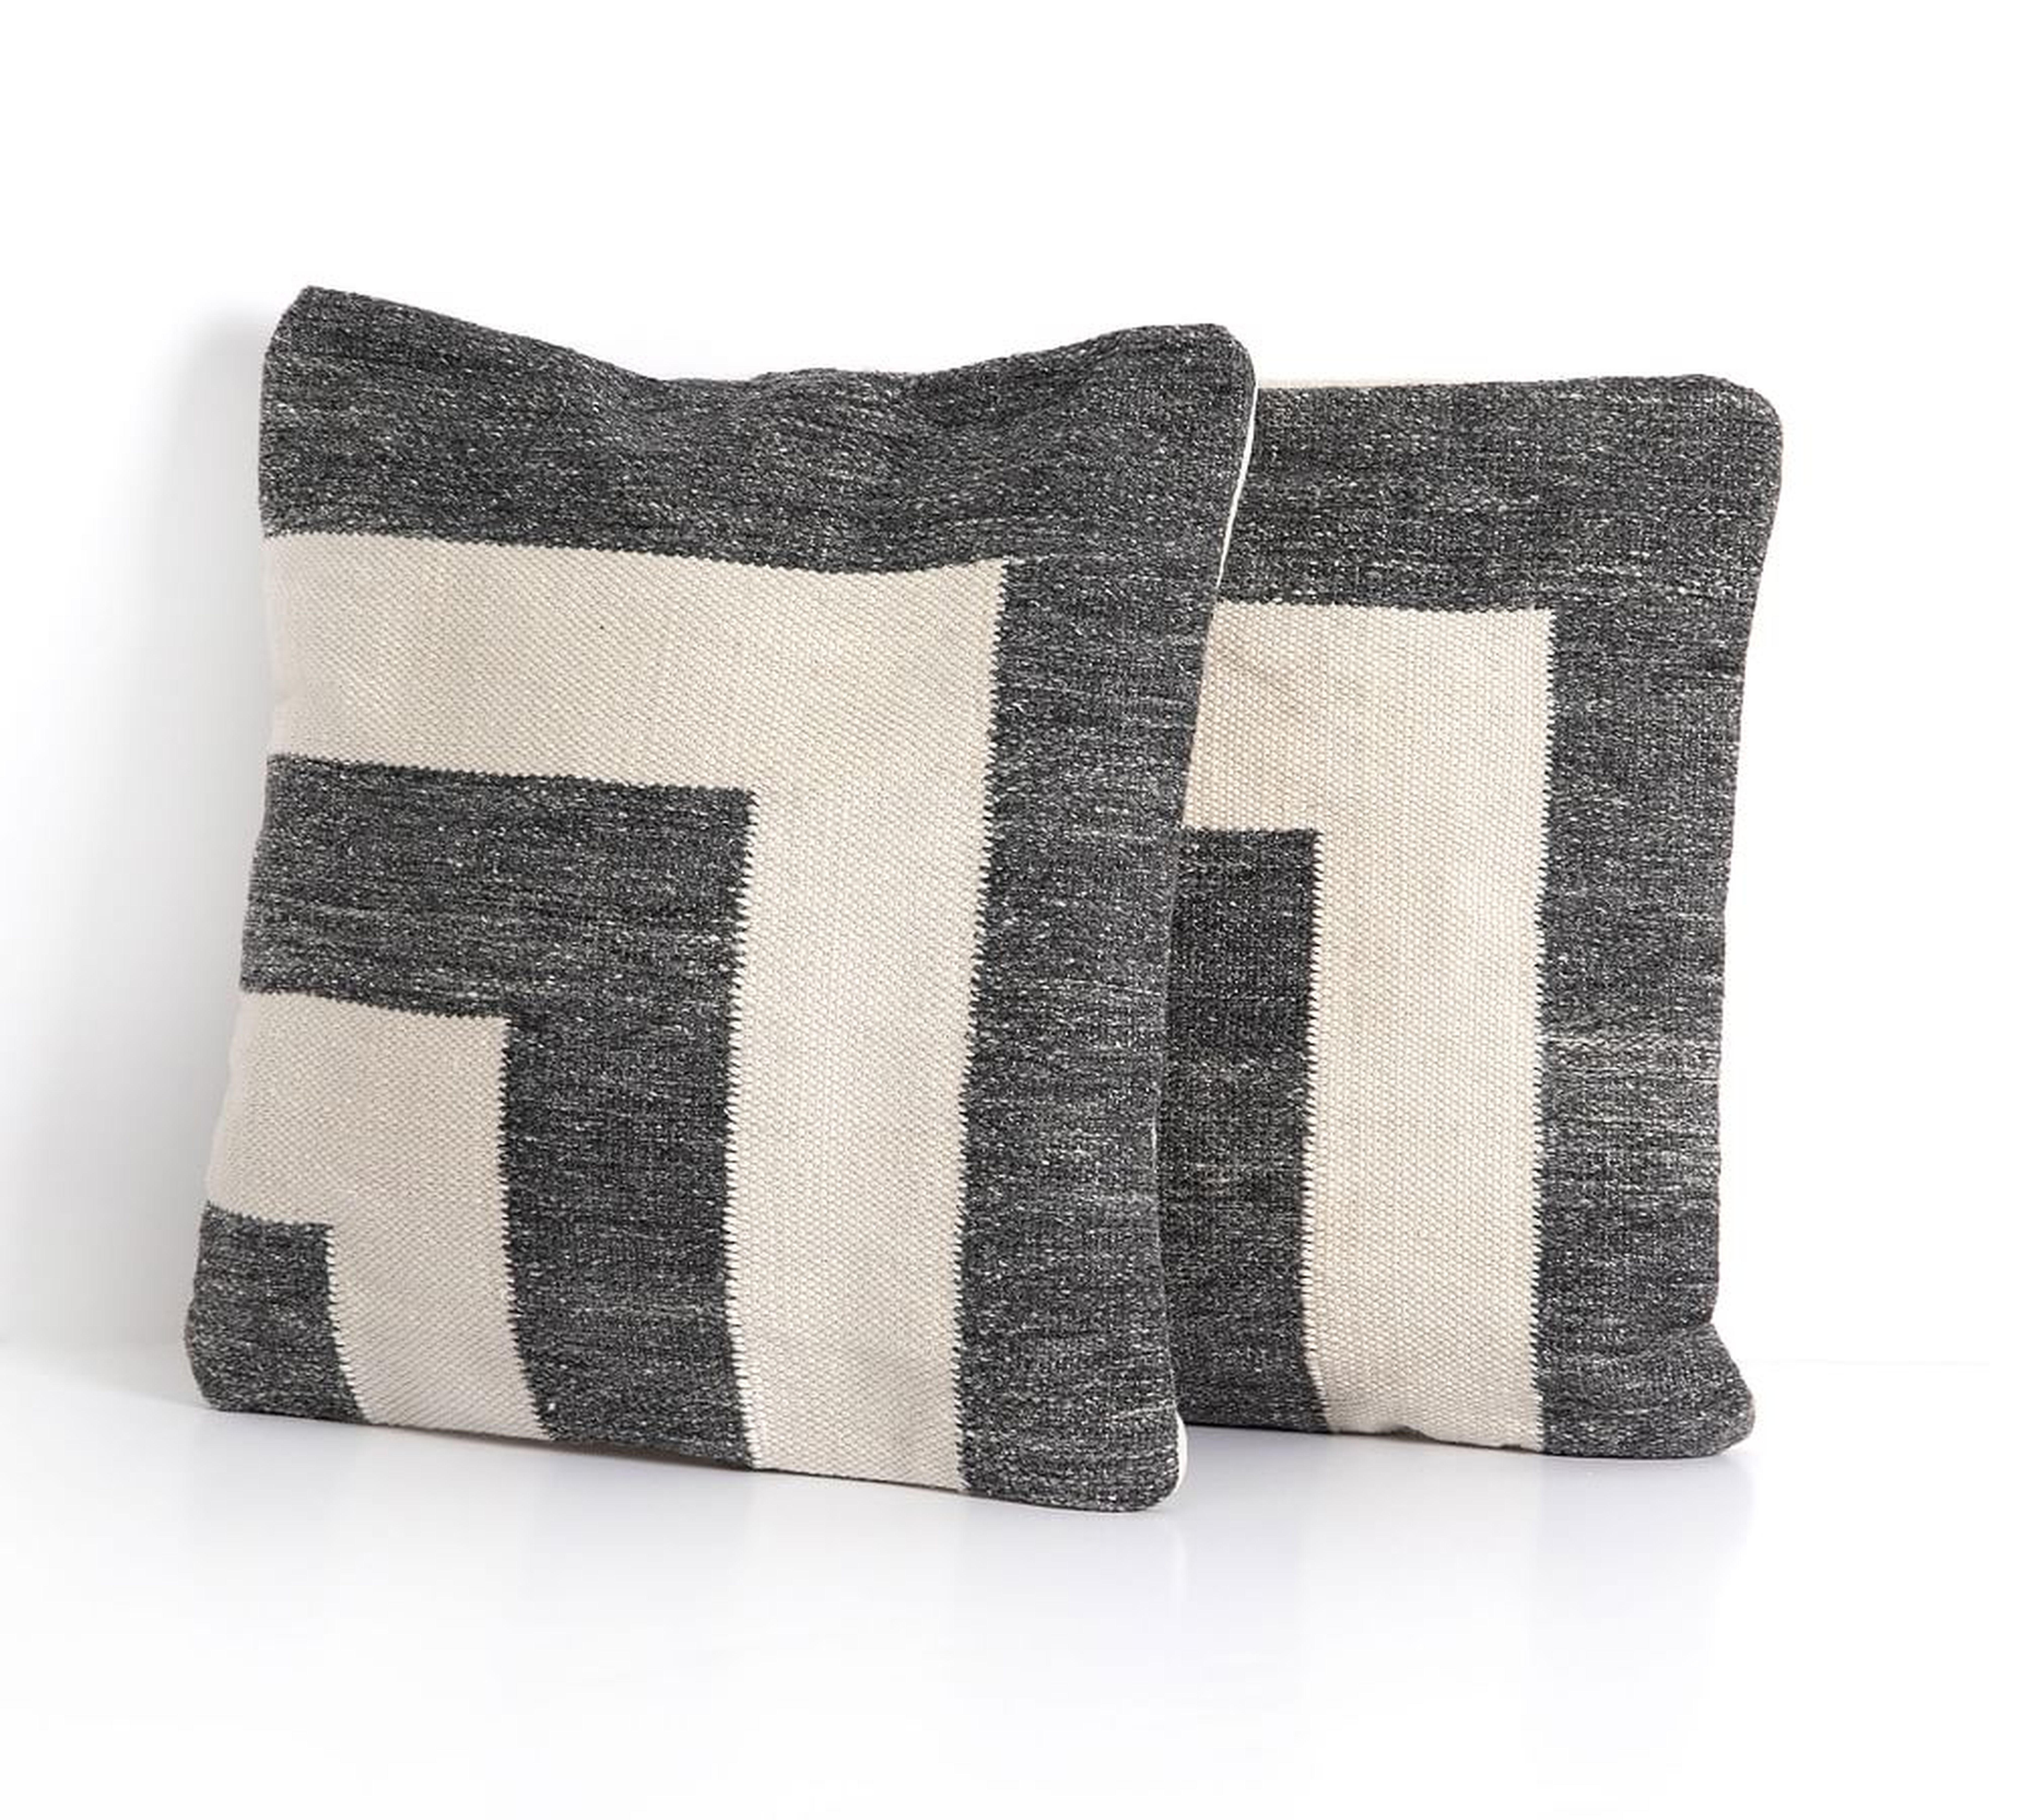 Grannus Indoor/Outdoor Pillow - Set of 2, 20 x 20", Charcoal/Ivory - Pottery Barn